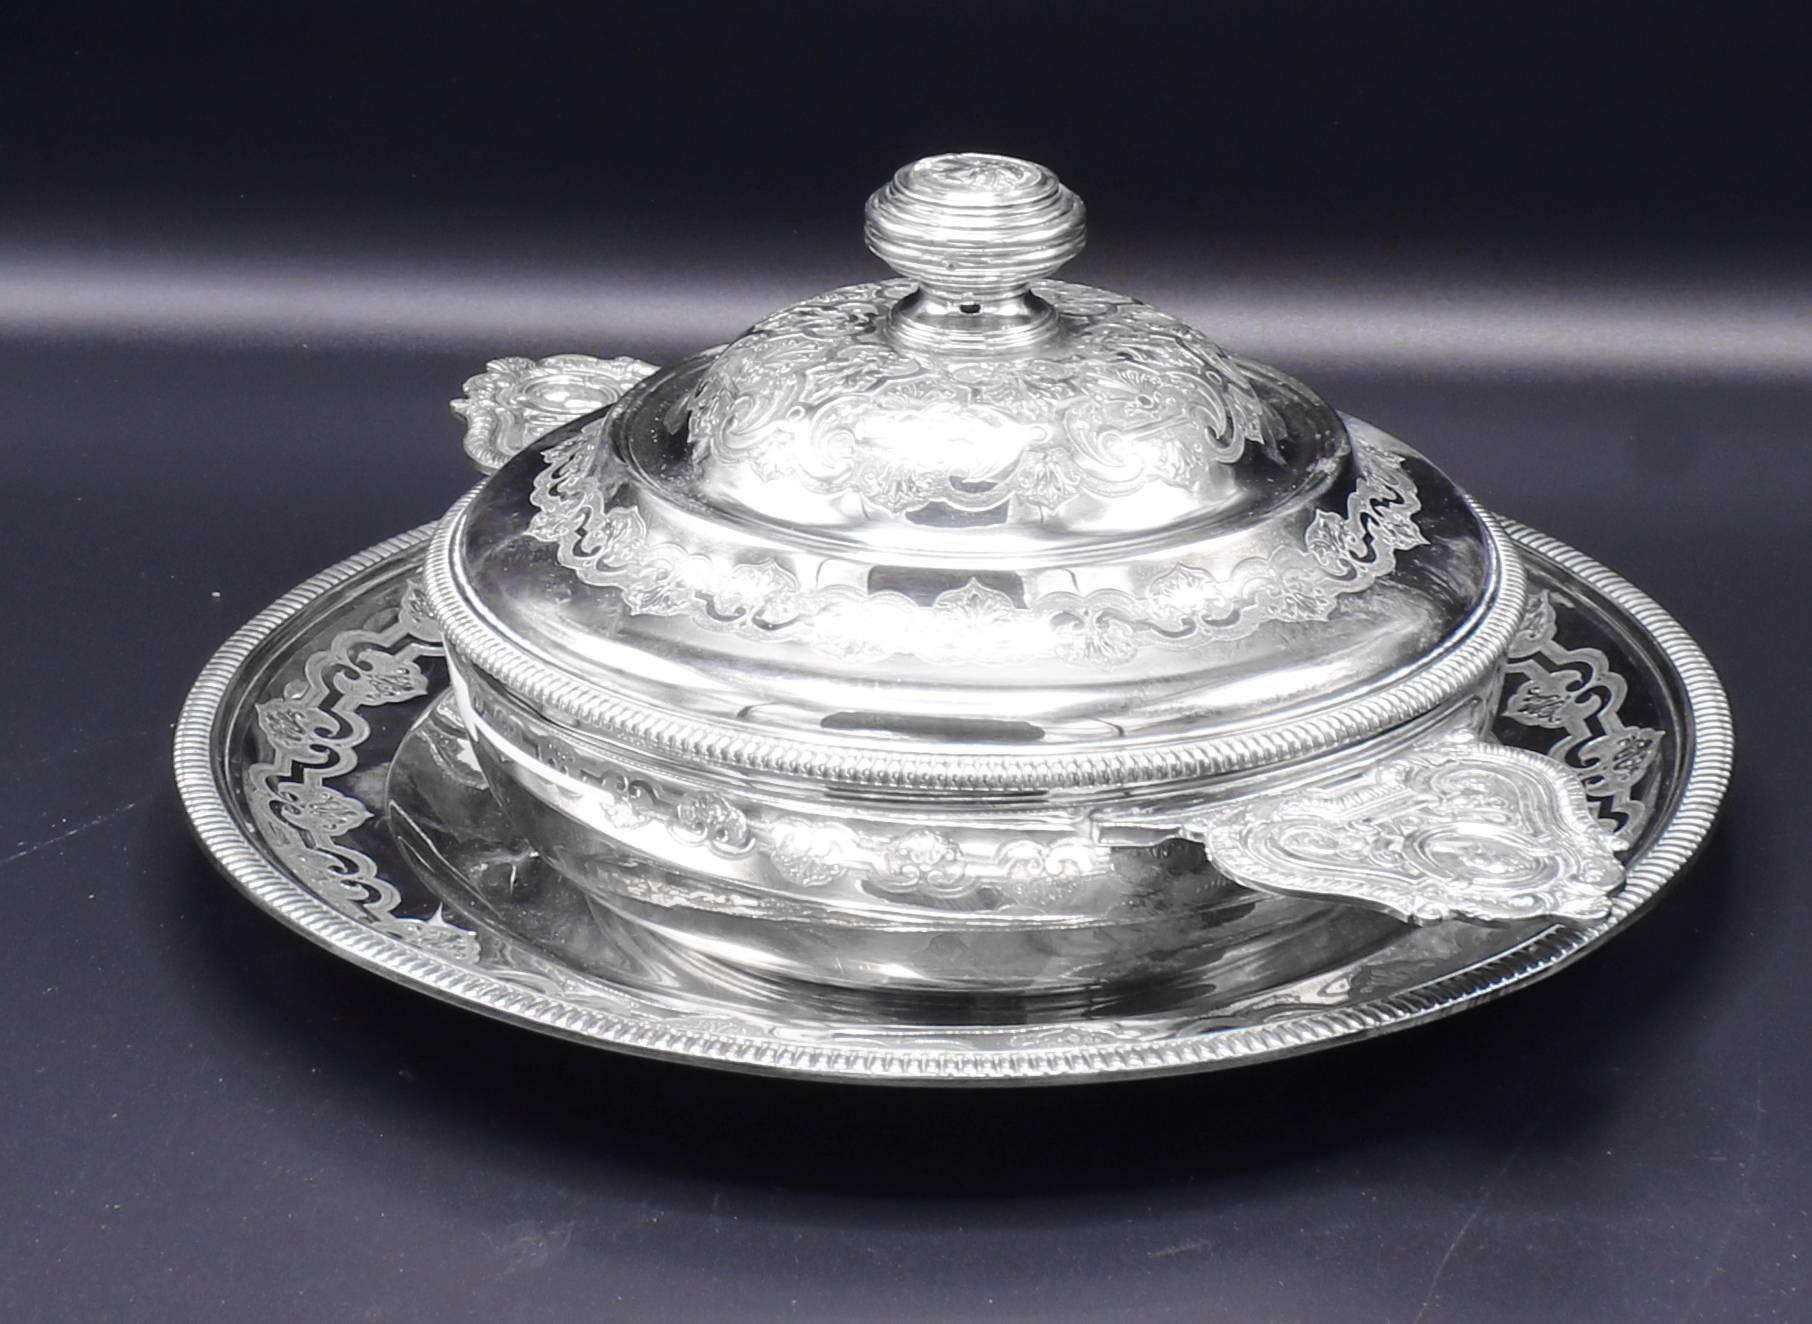 From Parisian master silversmiths  Lapparra 7 inch tureen with cover and matching 10½ under plate. Lapparra is one of would's finest silver smiths know for there intricate  and detailed engraving 51.35 ounces, 950 fine silver